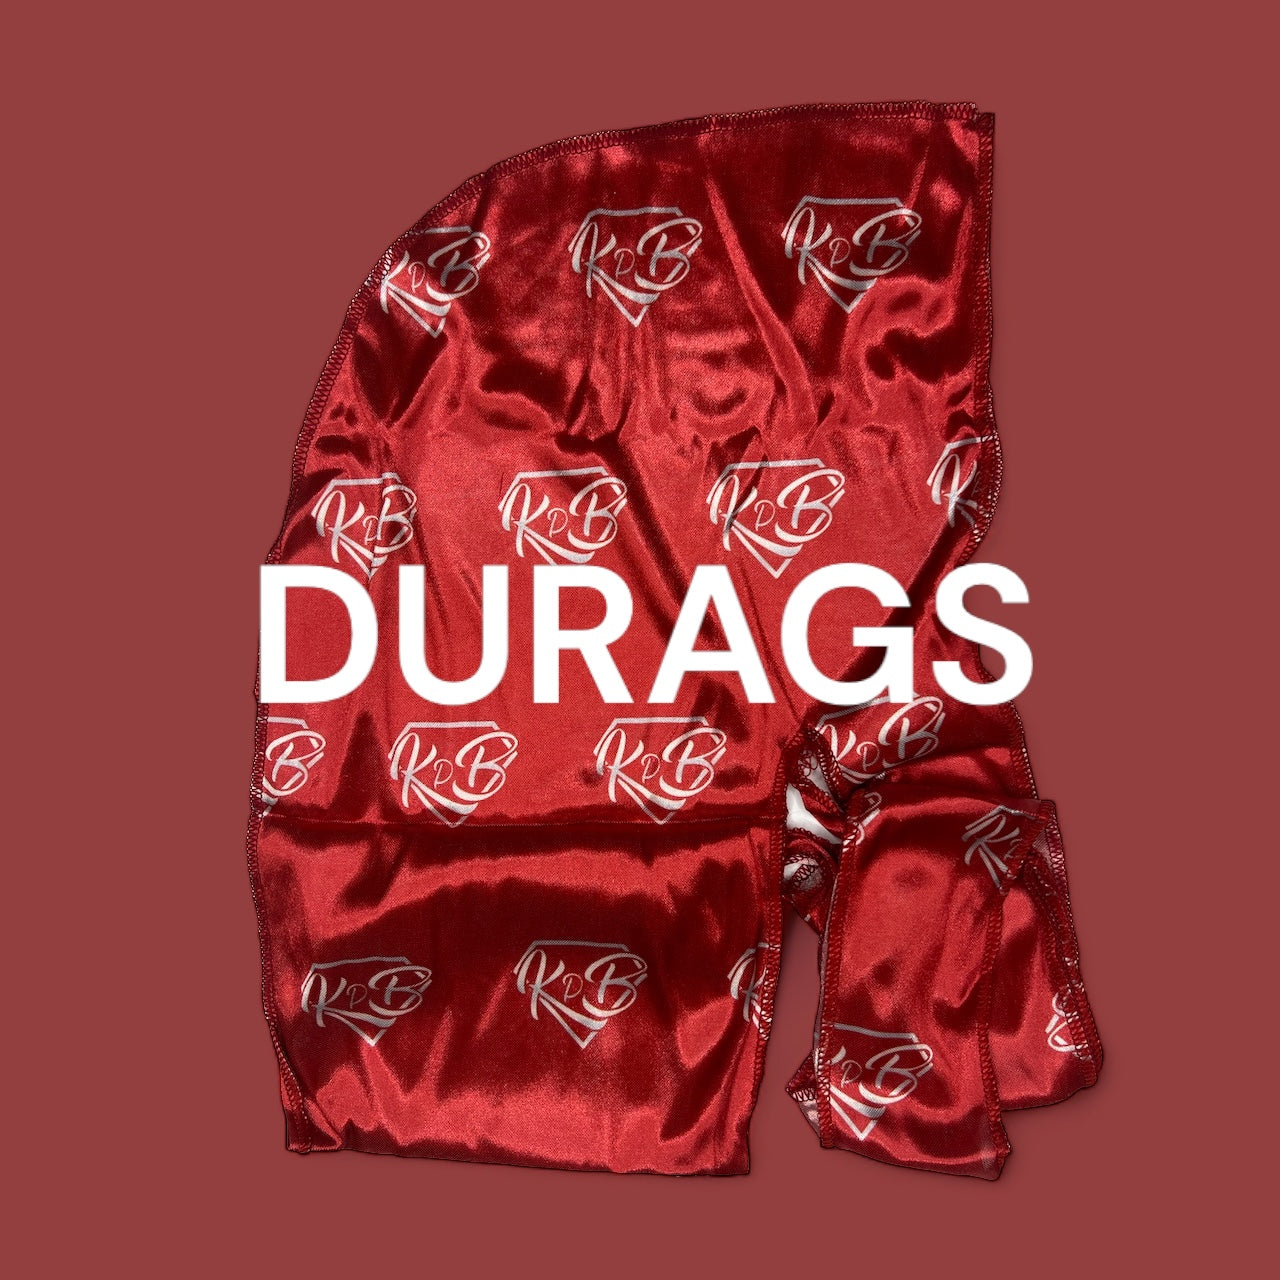 DURAGS